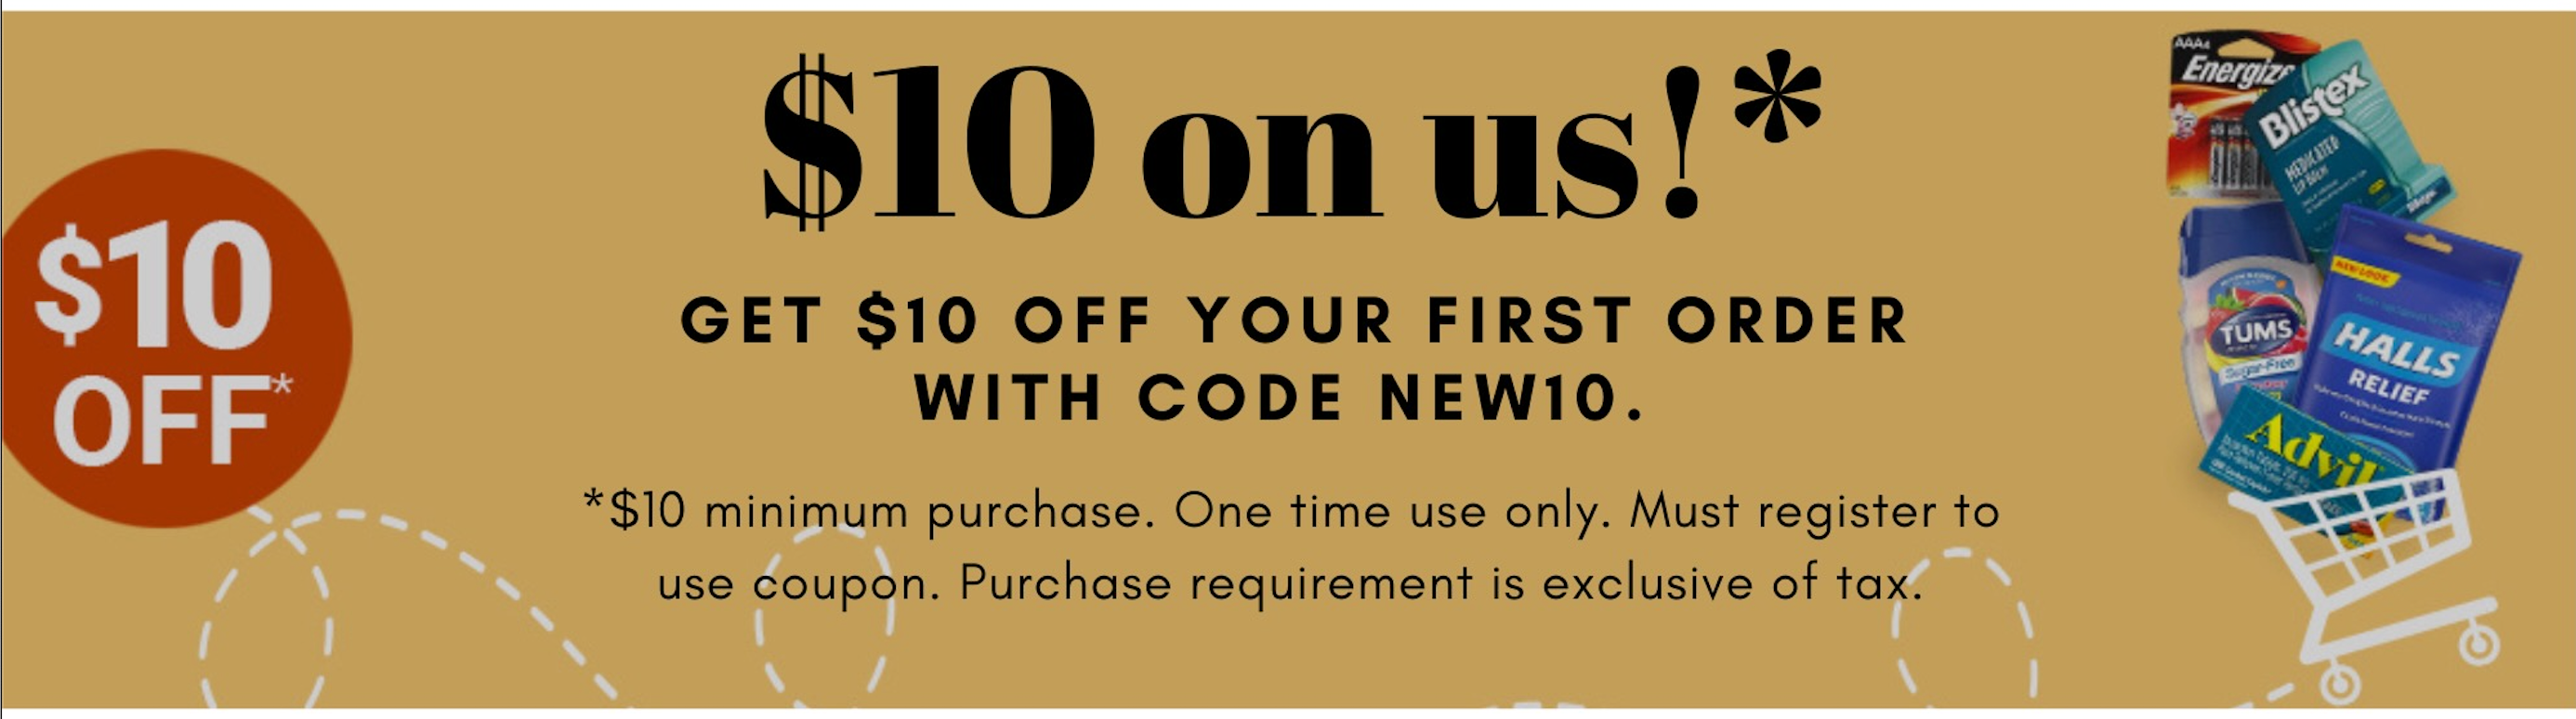 Get $10 off your first order with code new10!